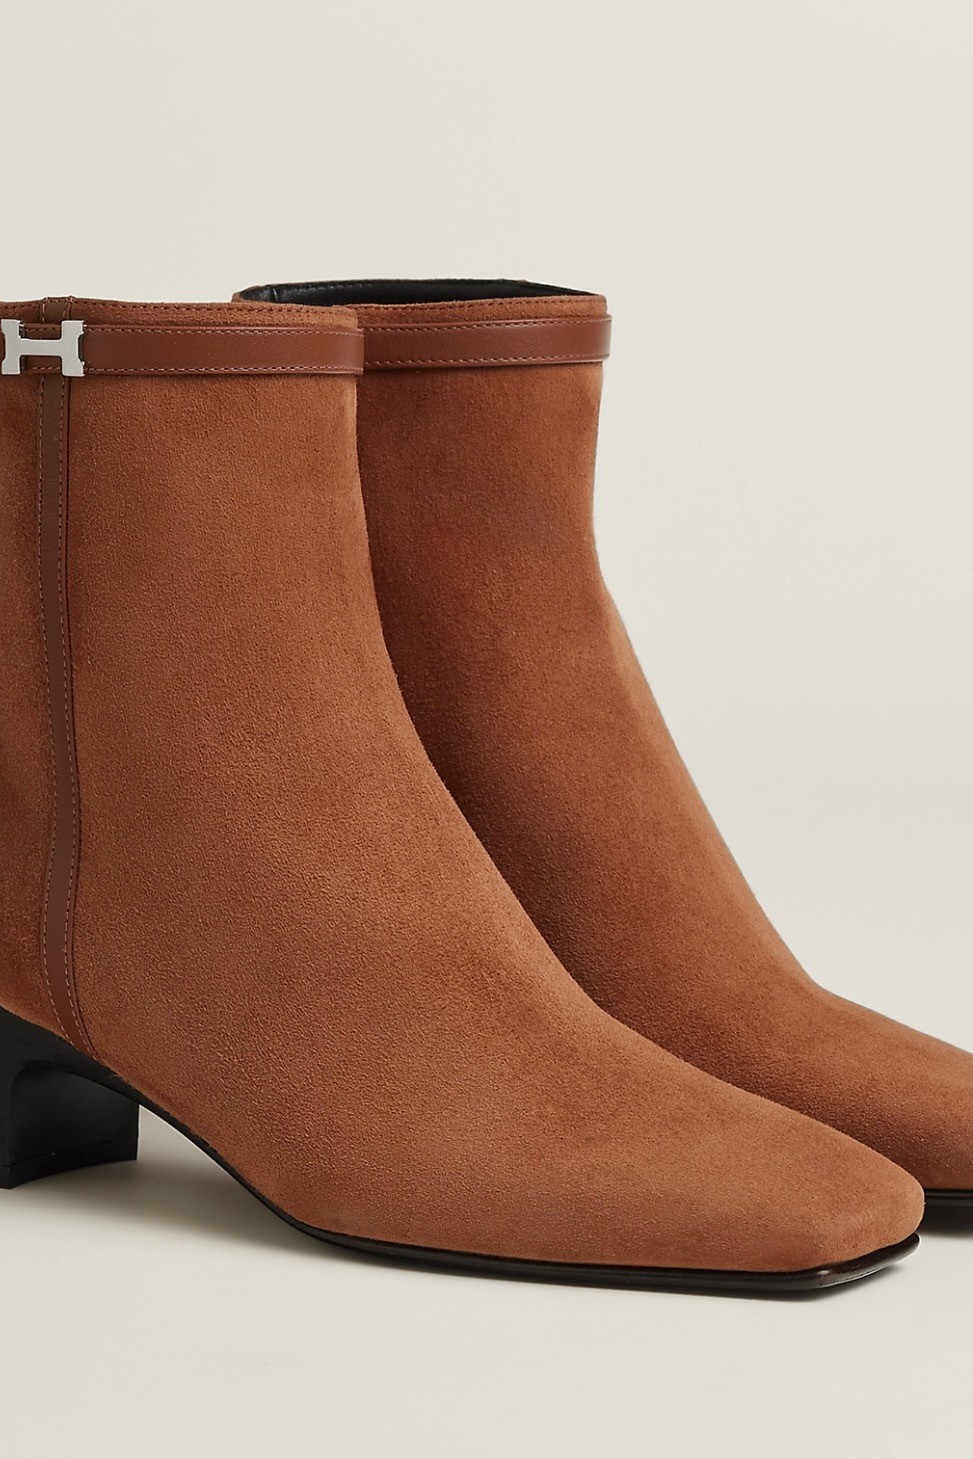 Hermès - Hommage ankle boot